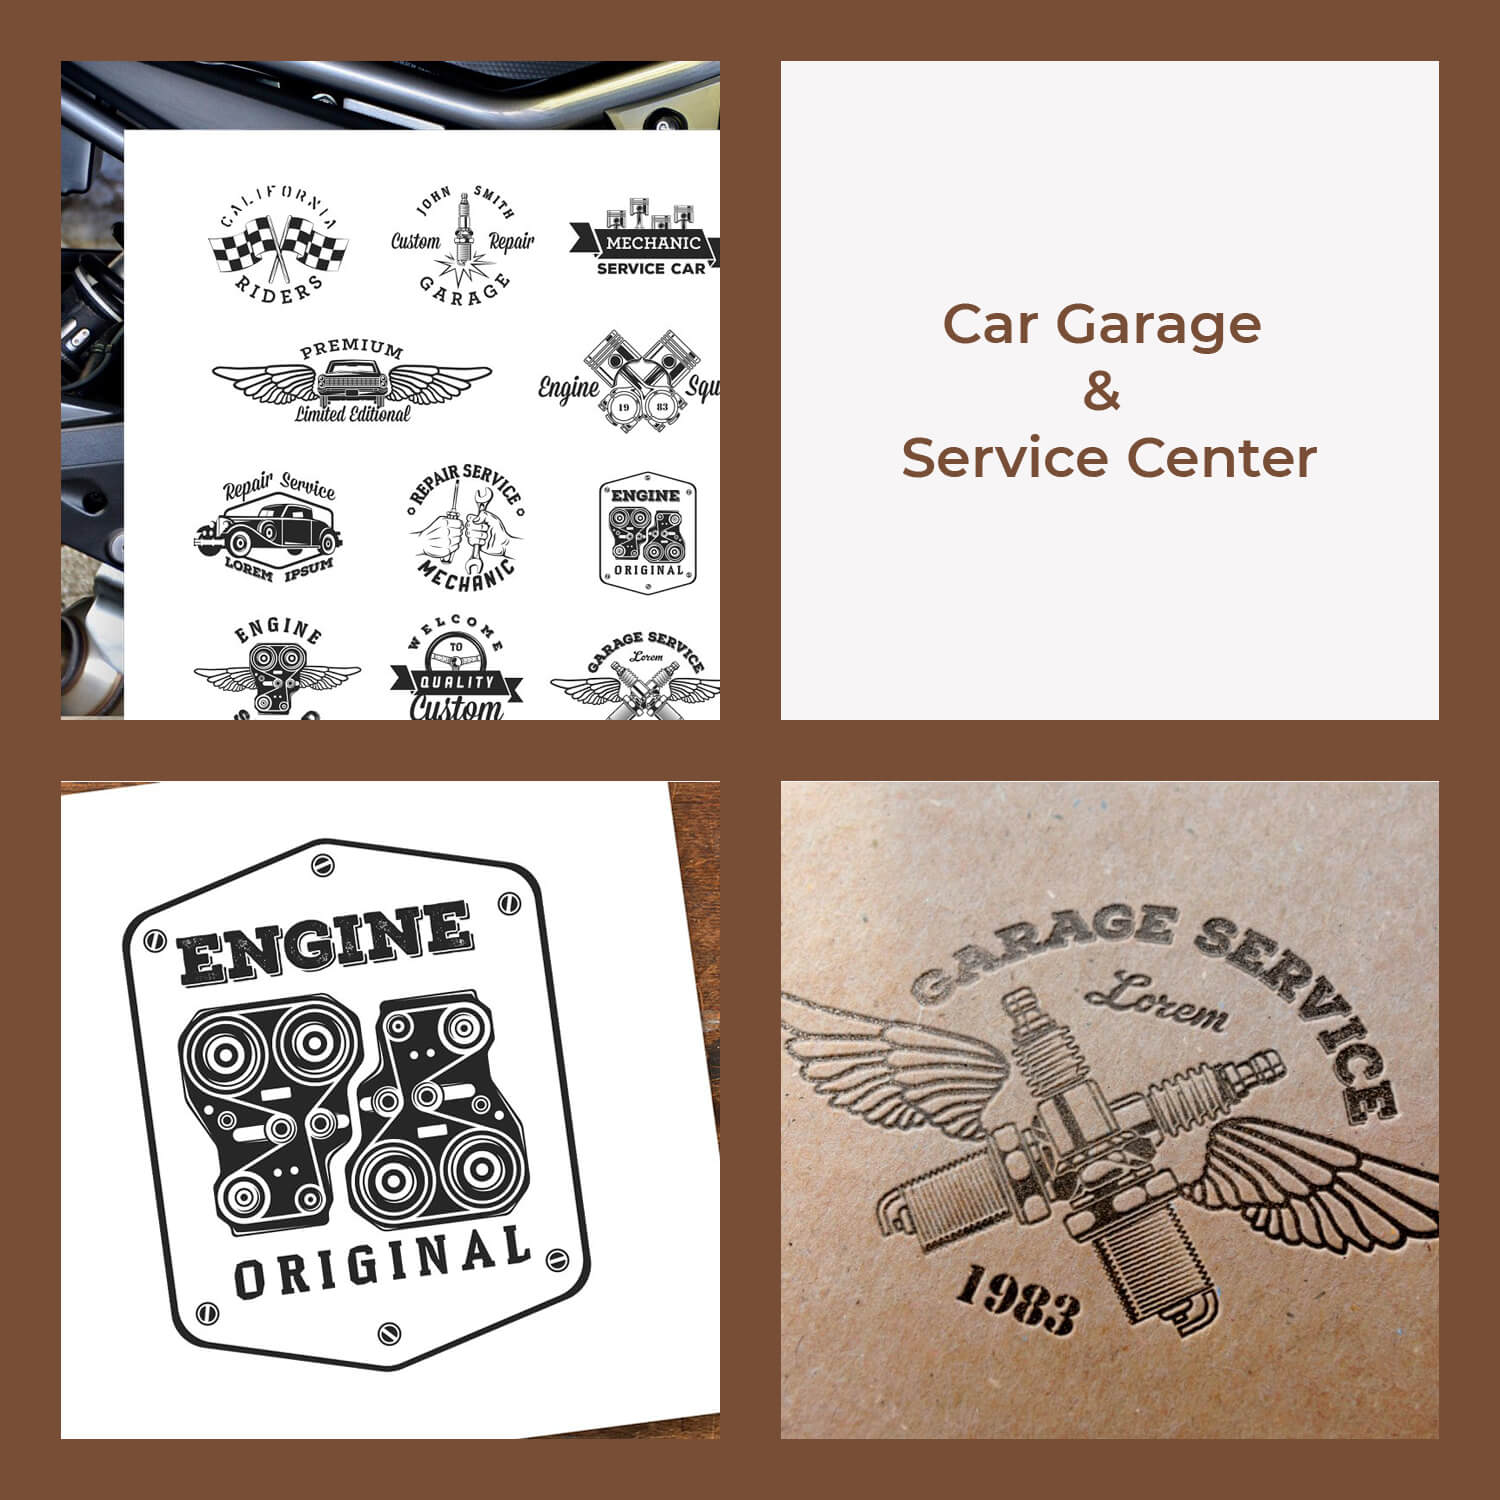 Four pictures of the service center theme in squares on a brown background.